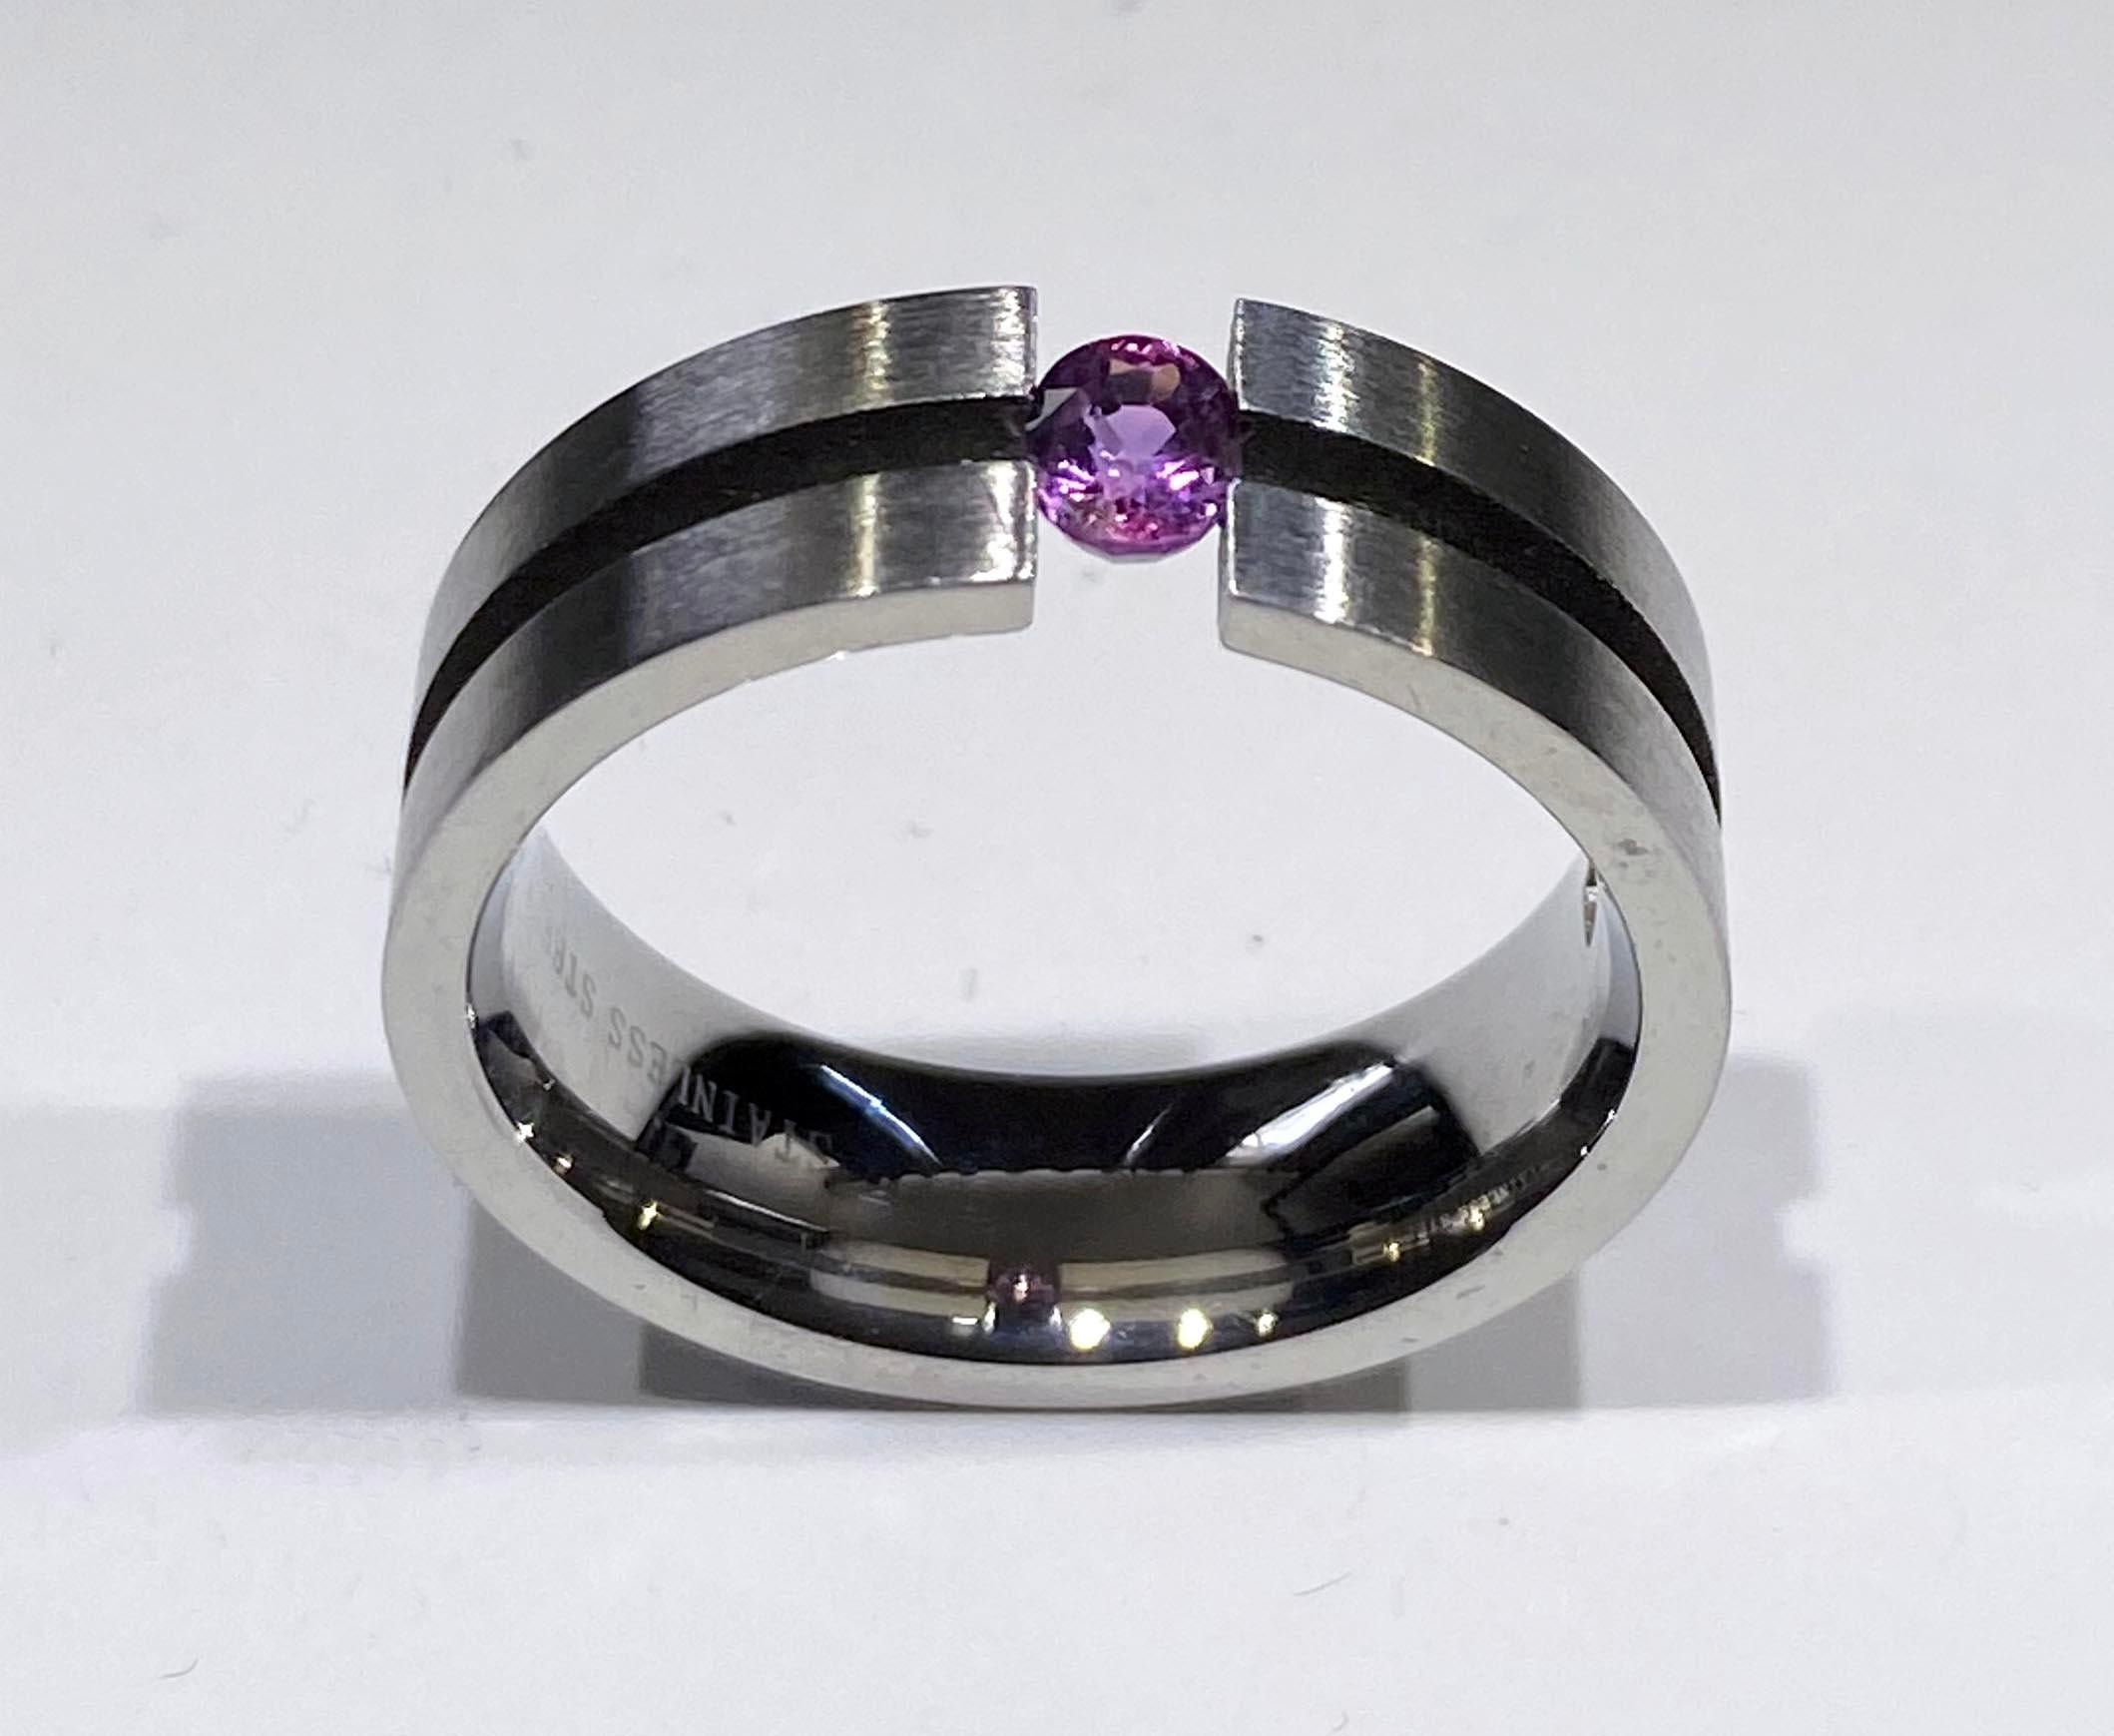 A Stainless Steel Tension Ring Set with an Oval Purple Sapphire.
This Stainless Steel Tension Ring is Set with a 0.33 Carat Oval Cut Natural Purple Sapphire of Sri Lankan Origin. The stone is held in place by the strength of the Stainless Steel Band